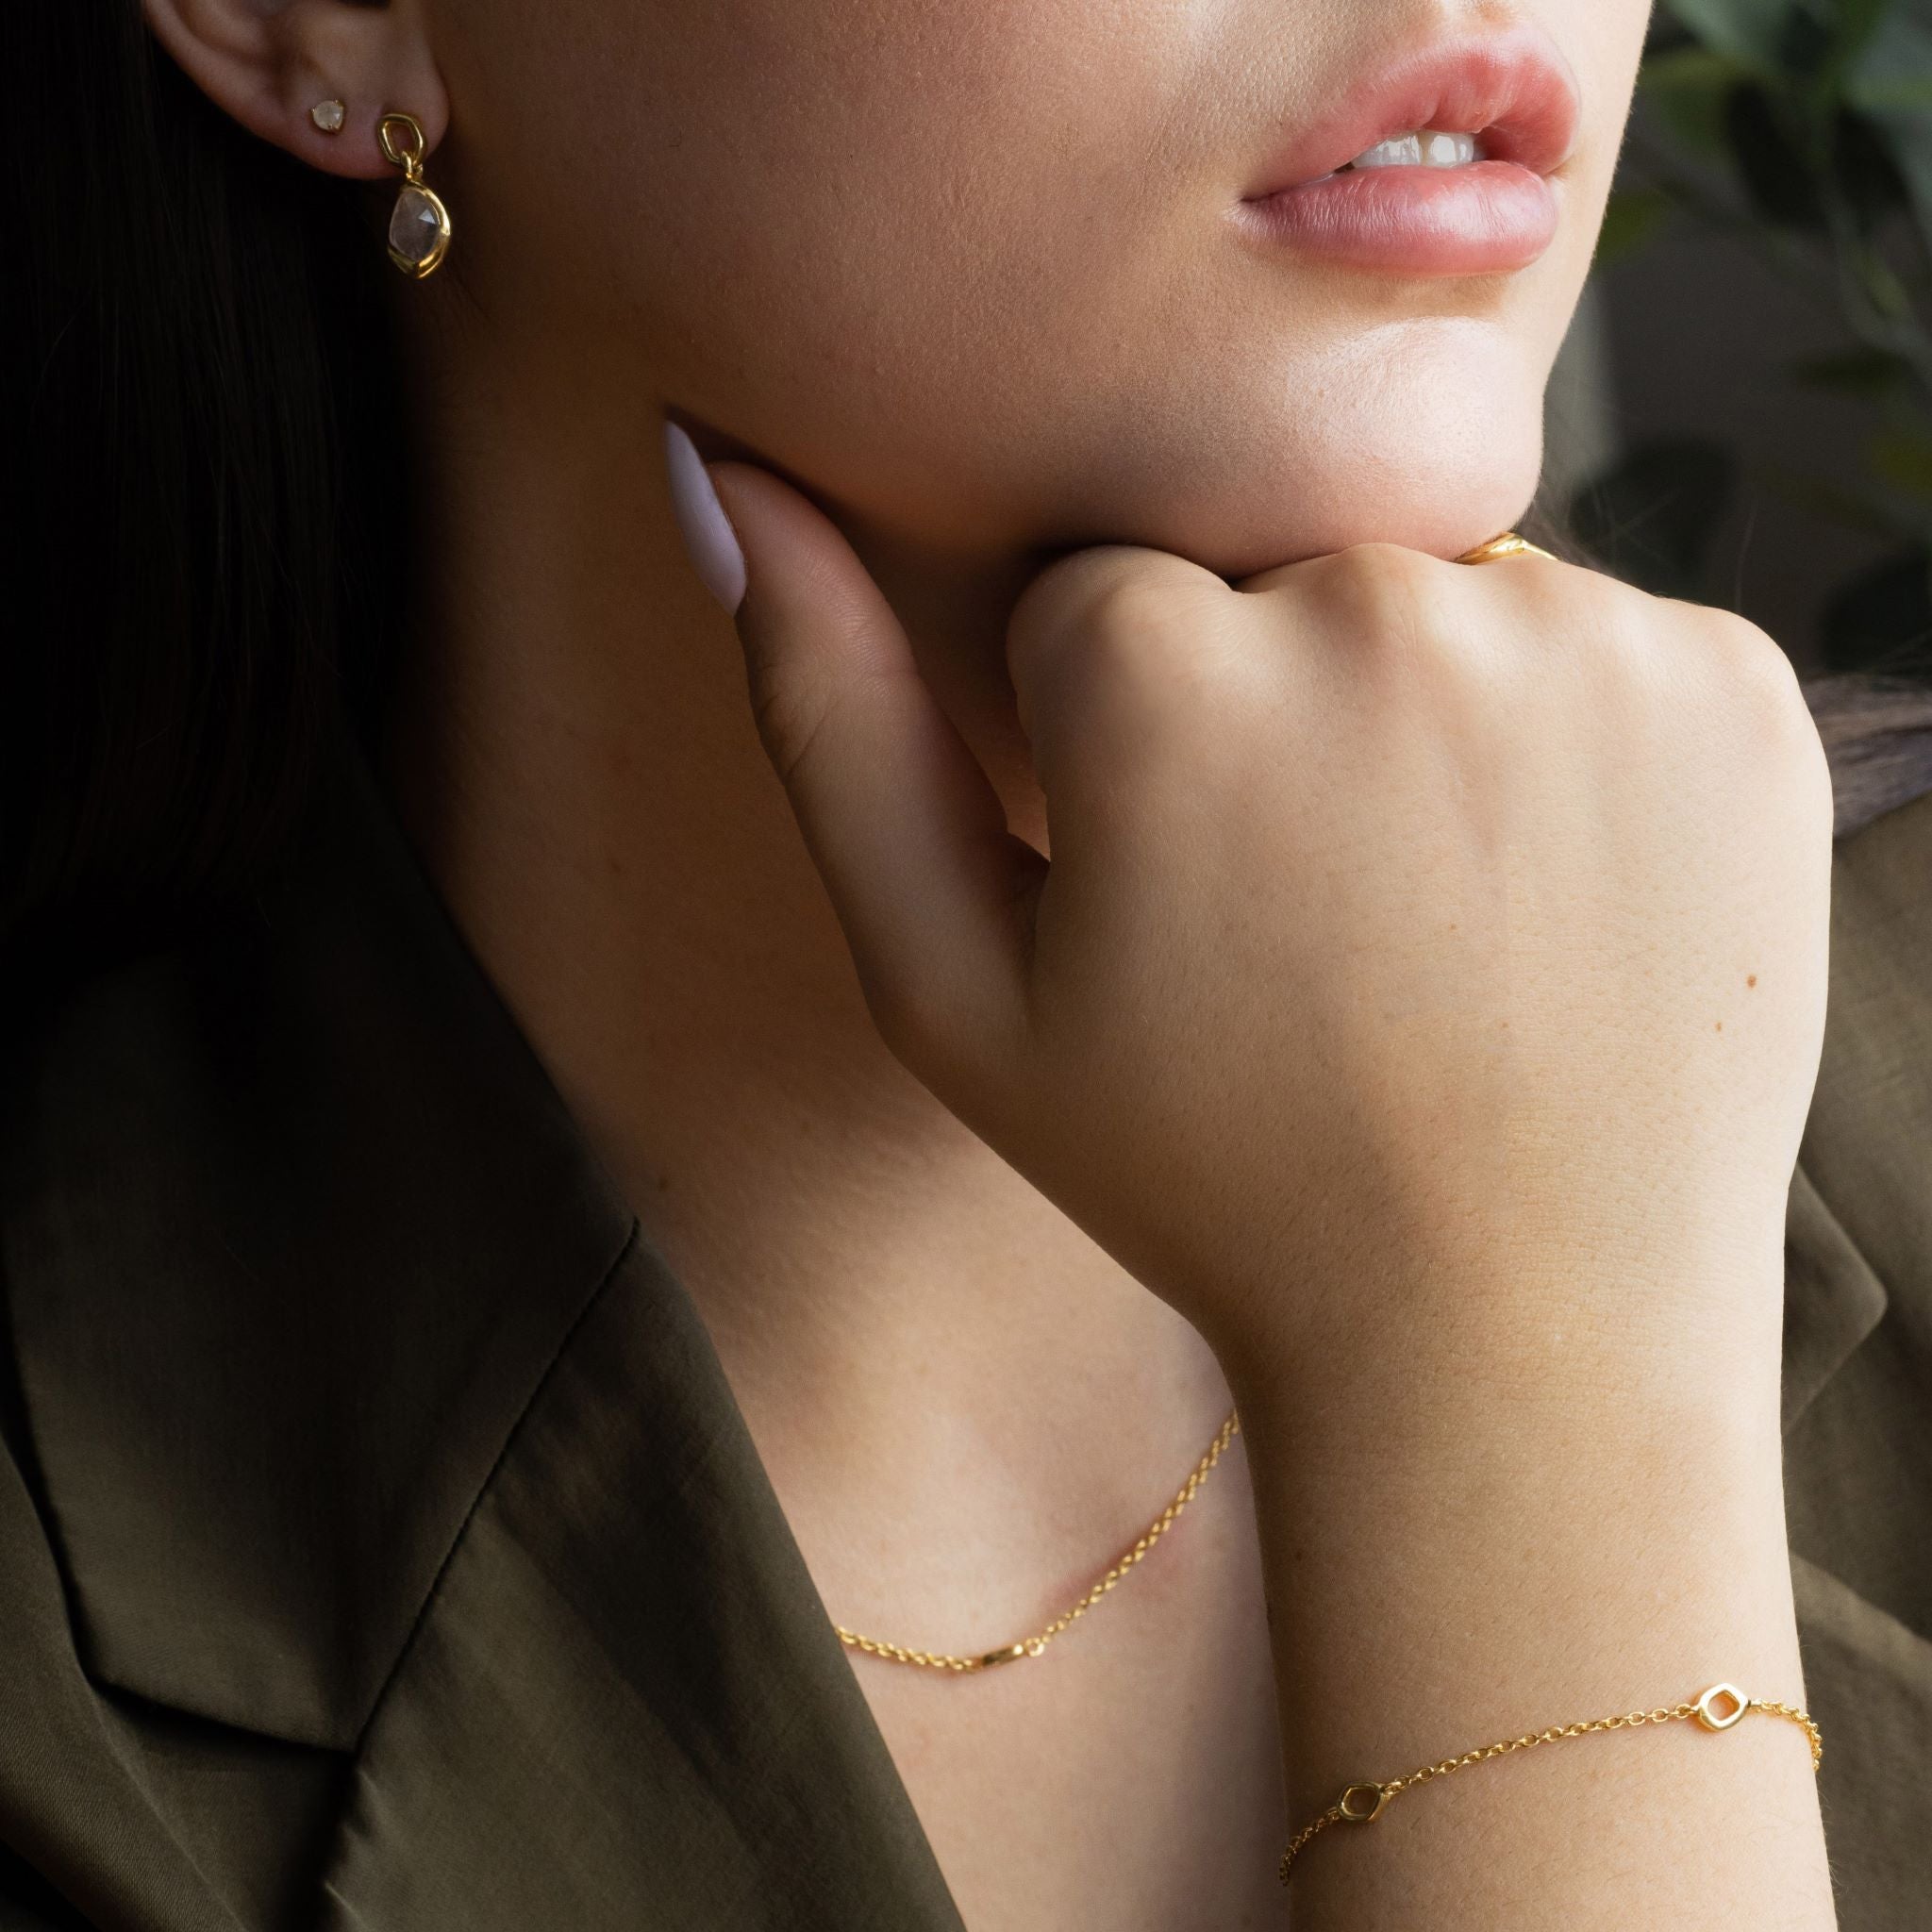 Bracelet features small dapple shapes and is crafted from sterling silver or 18ct gold vermeil.